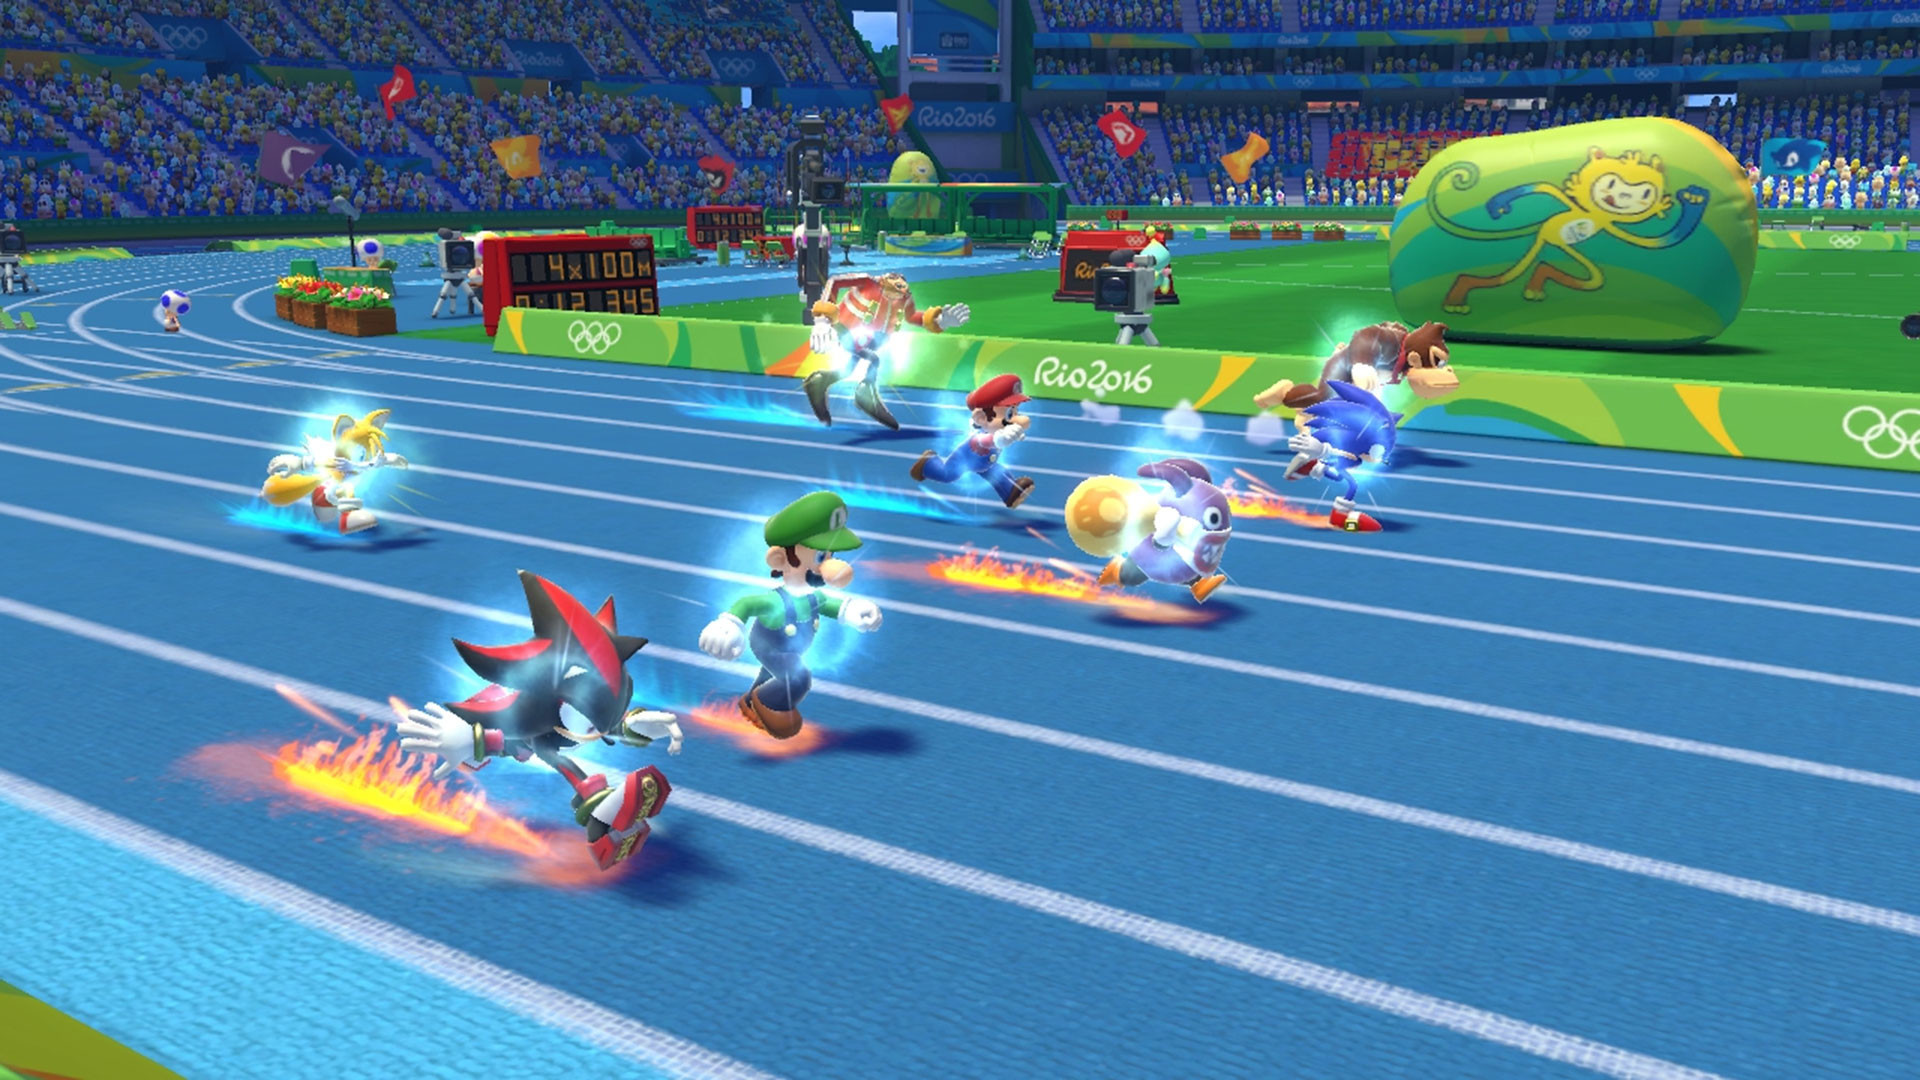 1920x1080 Mario and Sonic at the Rio 2016 Olymic Games 4K Wallpaper ...